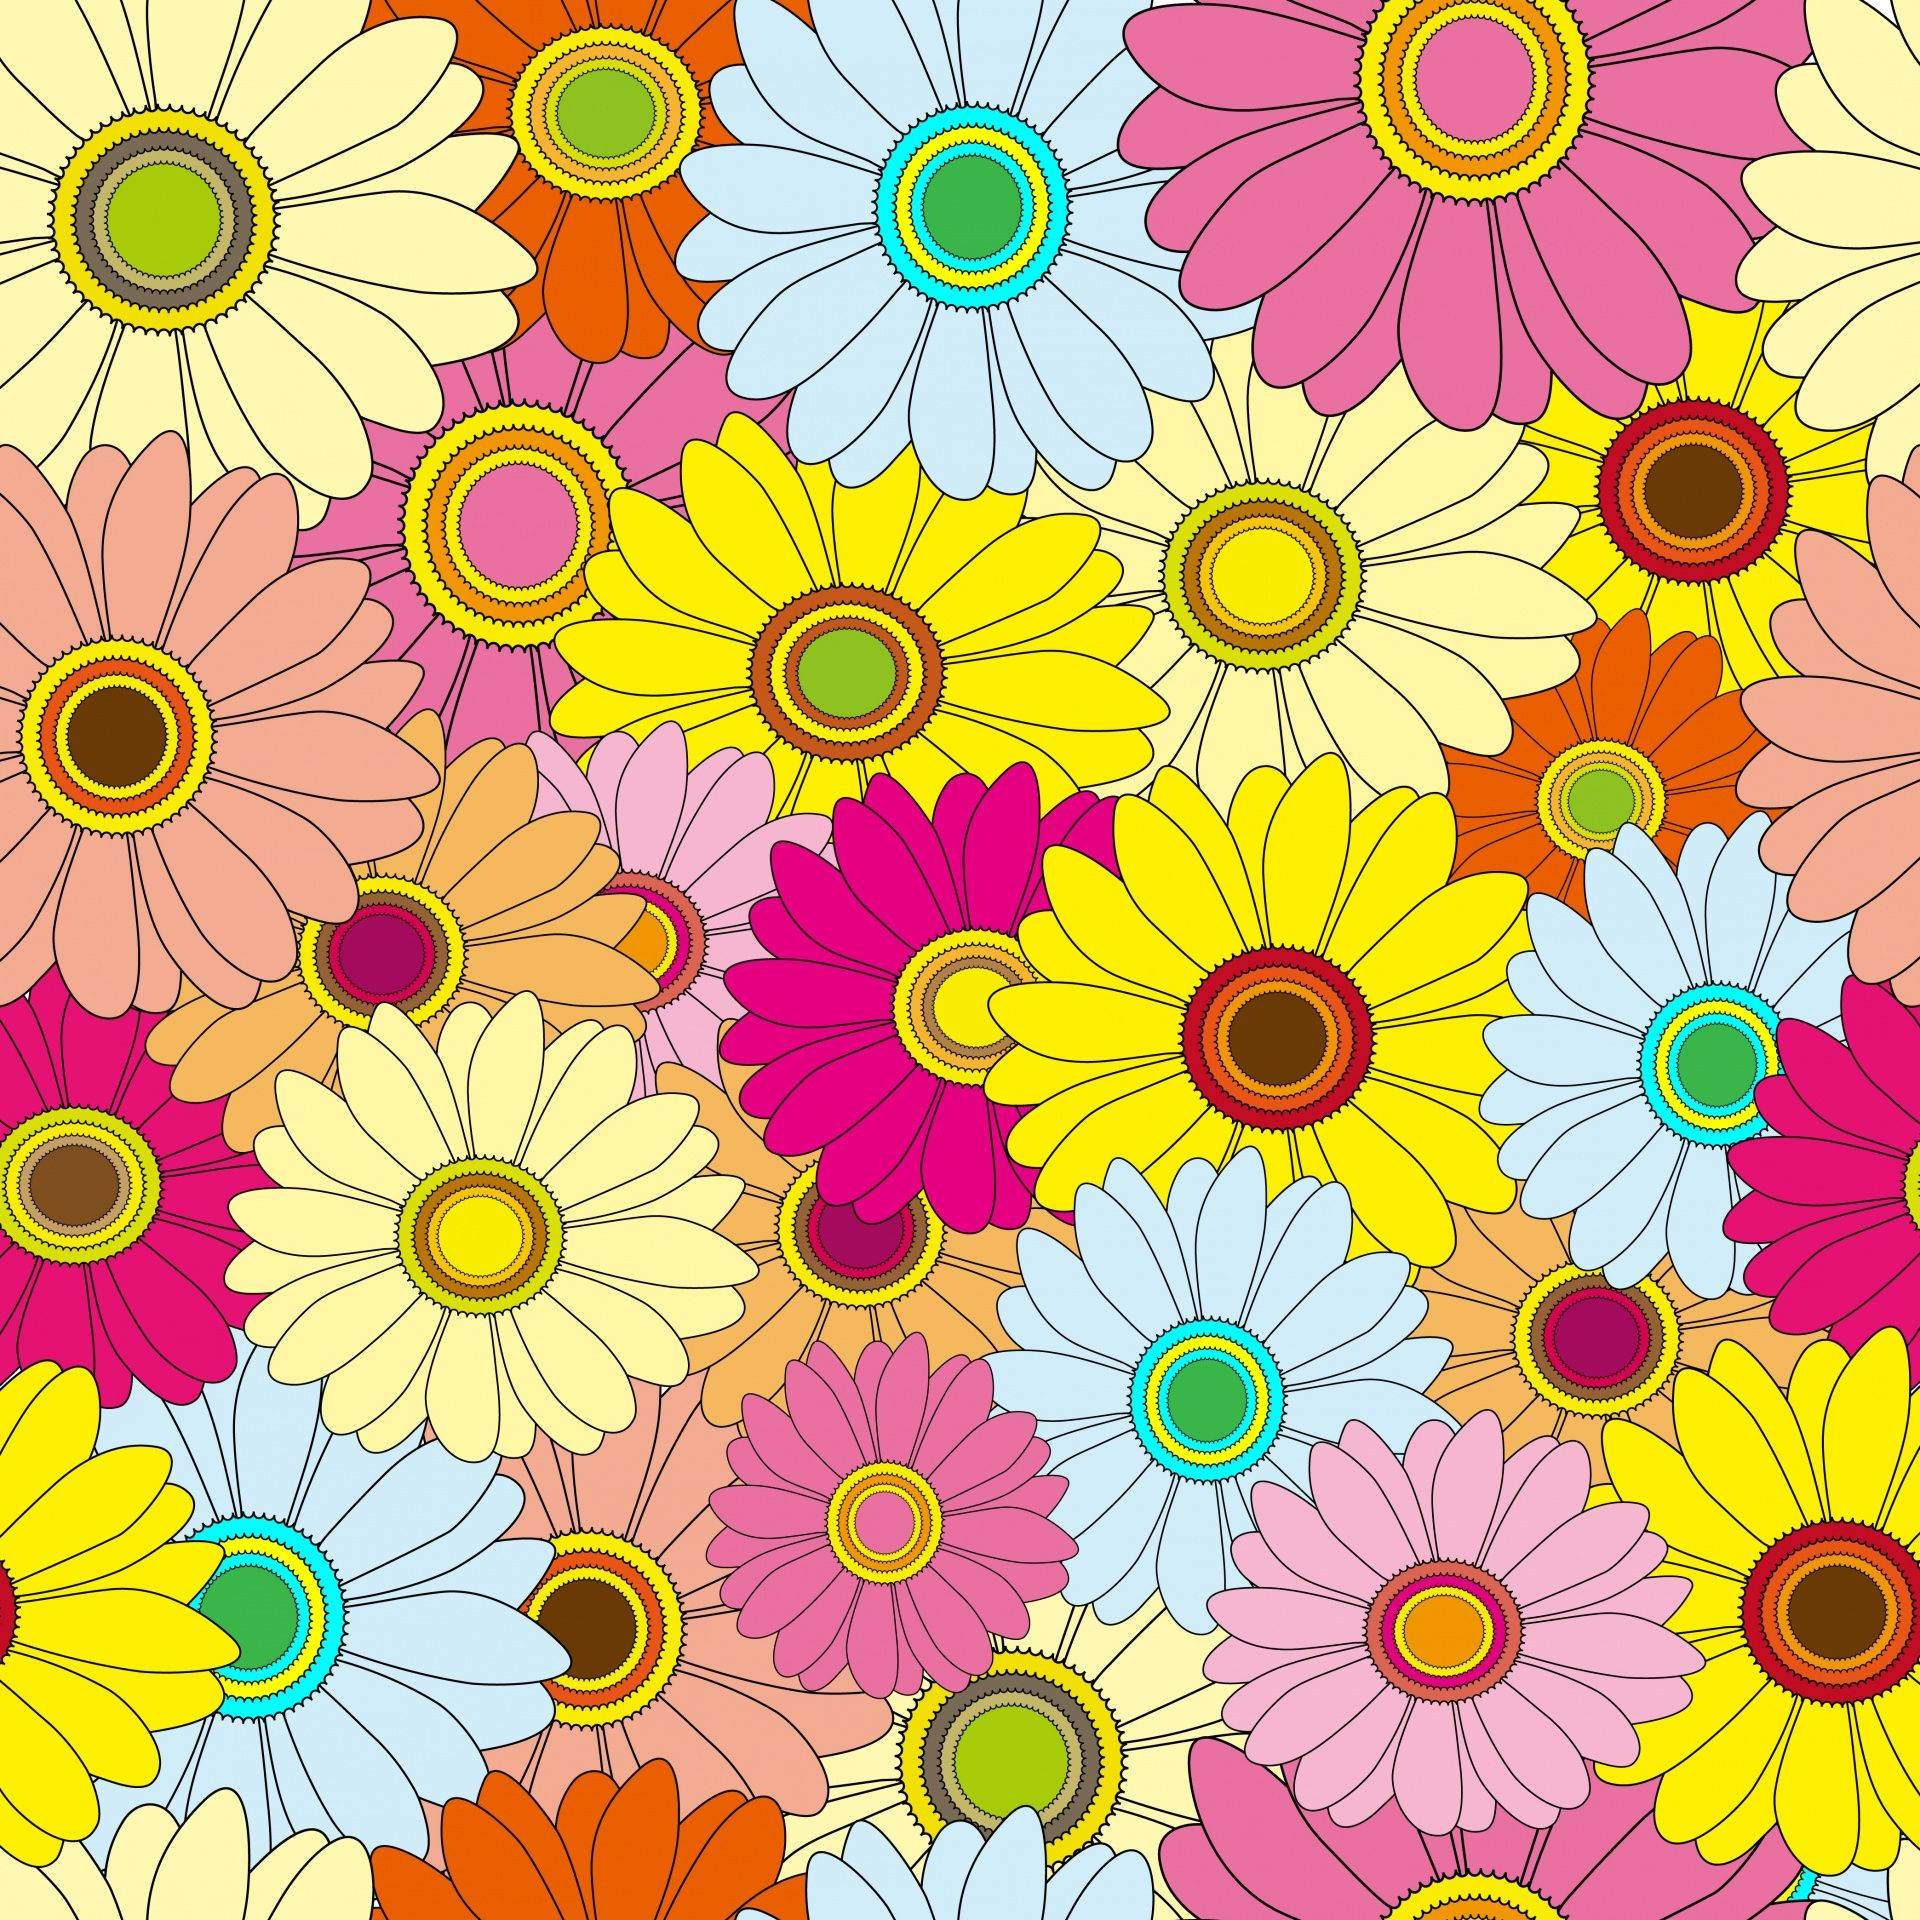 Free Floral Wallpaper Downloads, [400+] Floral Wallpapers for FREE |  